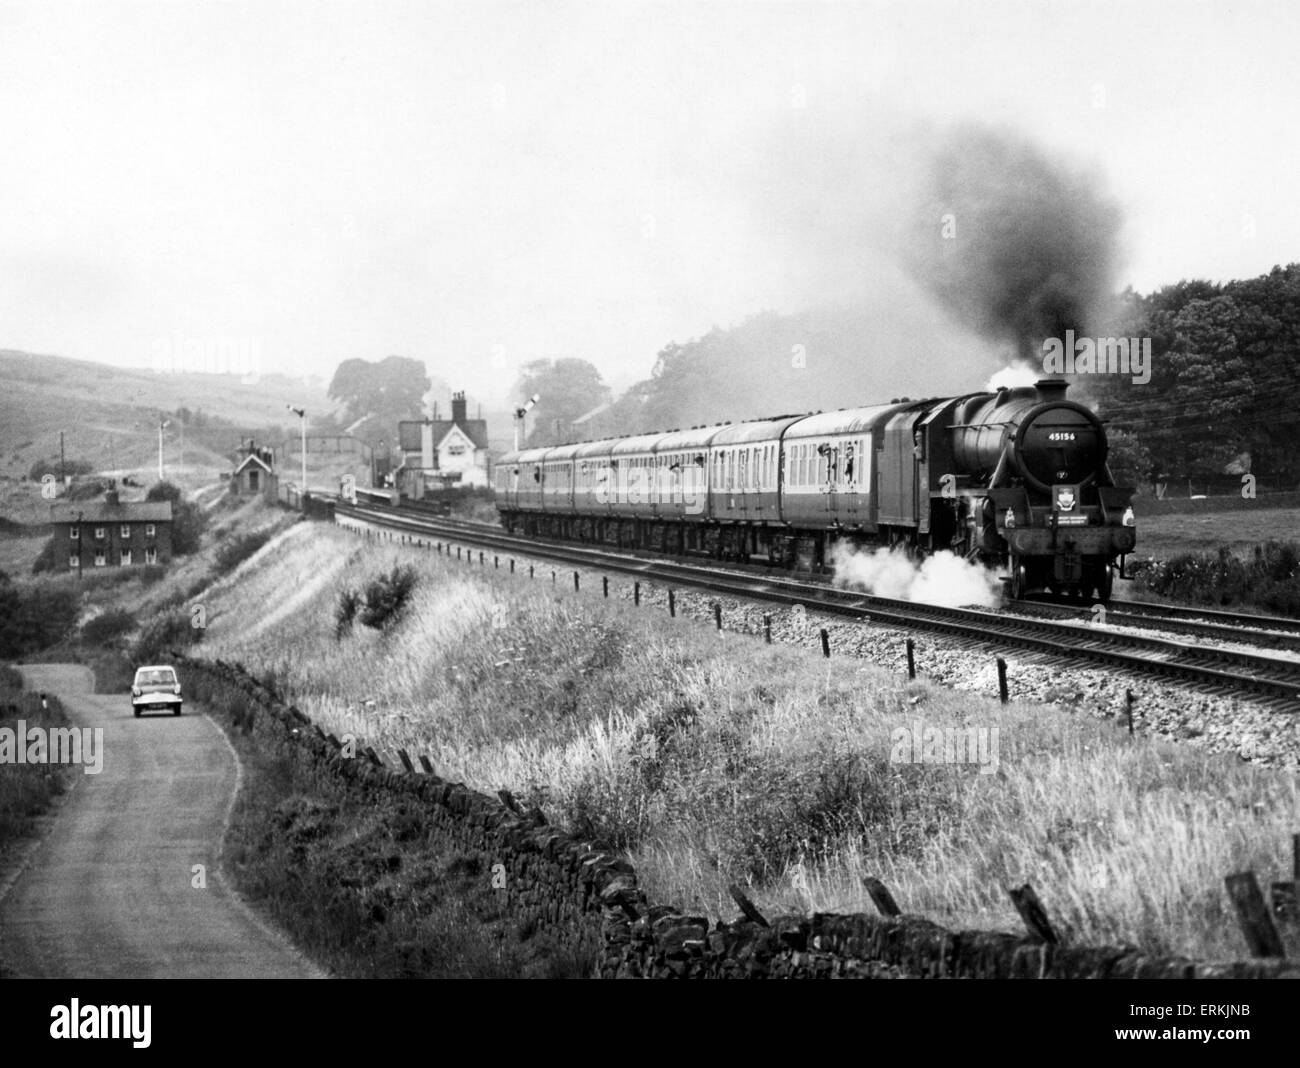 London Midland and Scottish Railway 4-6-0 Stanier Class Five steam locomotive number 45156, heads the G.C. Enterprises special train through Clapham between Carnforth and Settle. 4th August 1968. Stock Photo